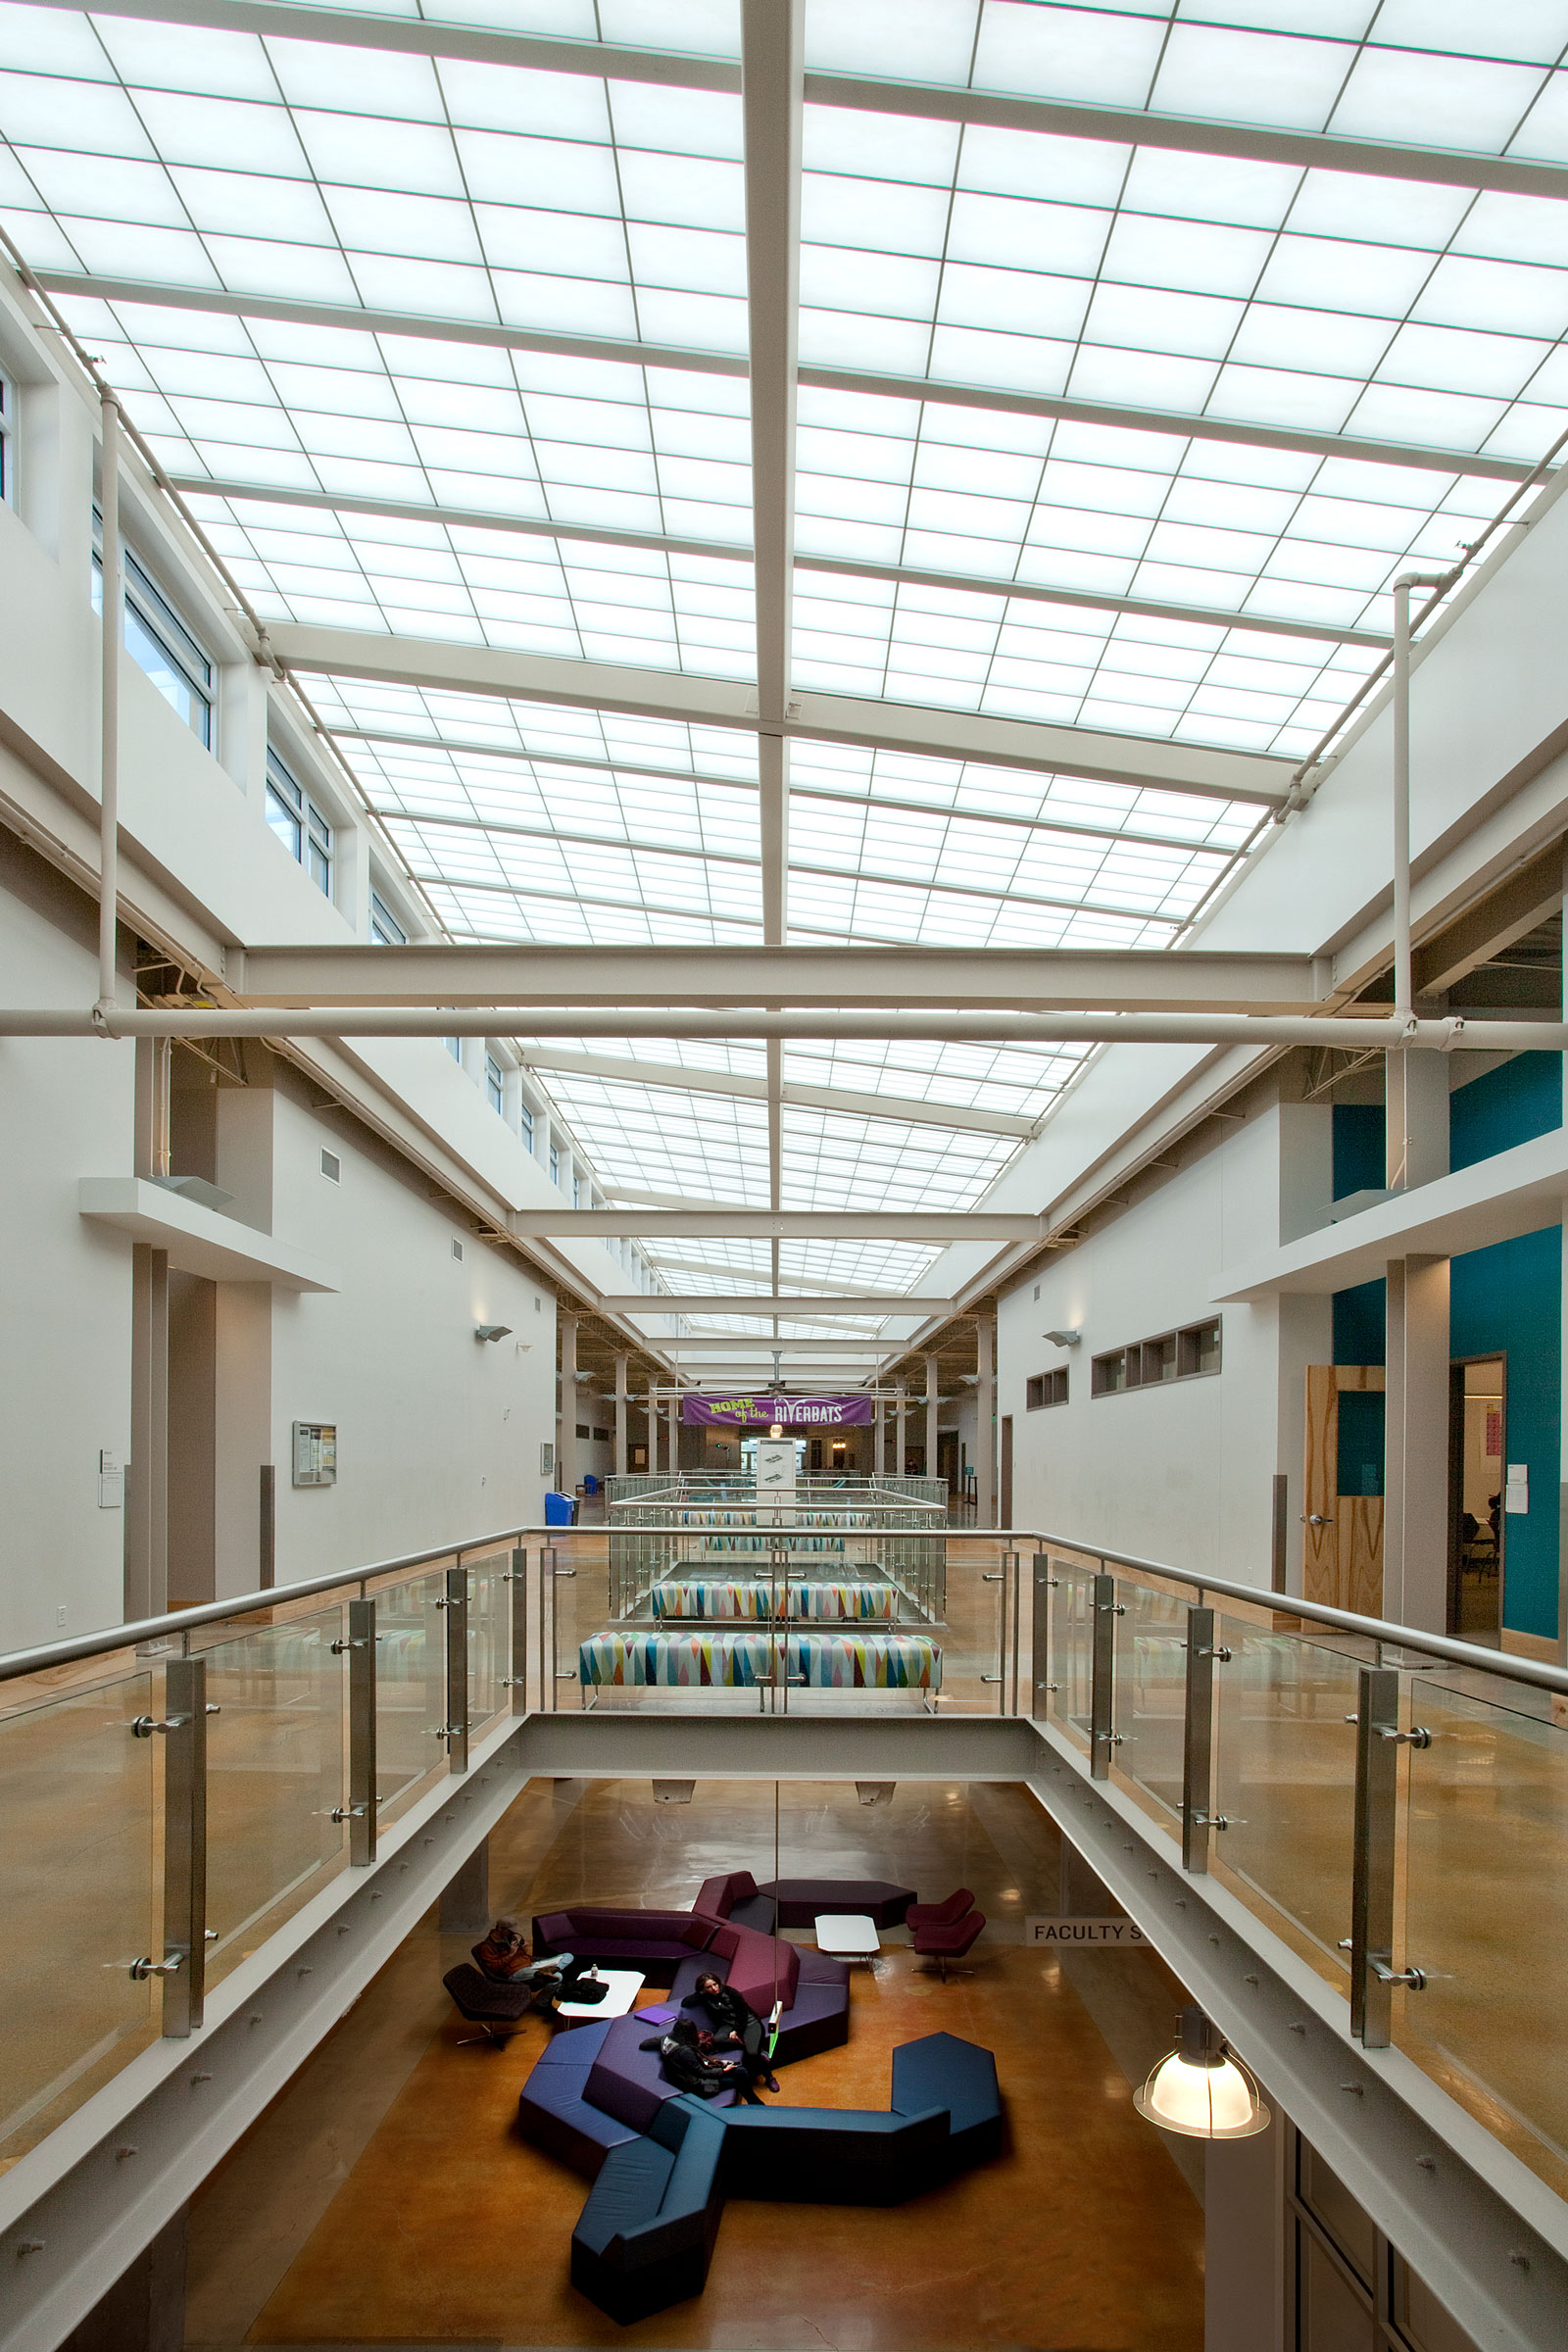 Daylighting-in-Educational-Spaces-Austin-Community-College-credit-Kingspan-Light-+-Air